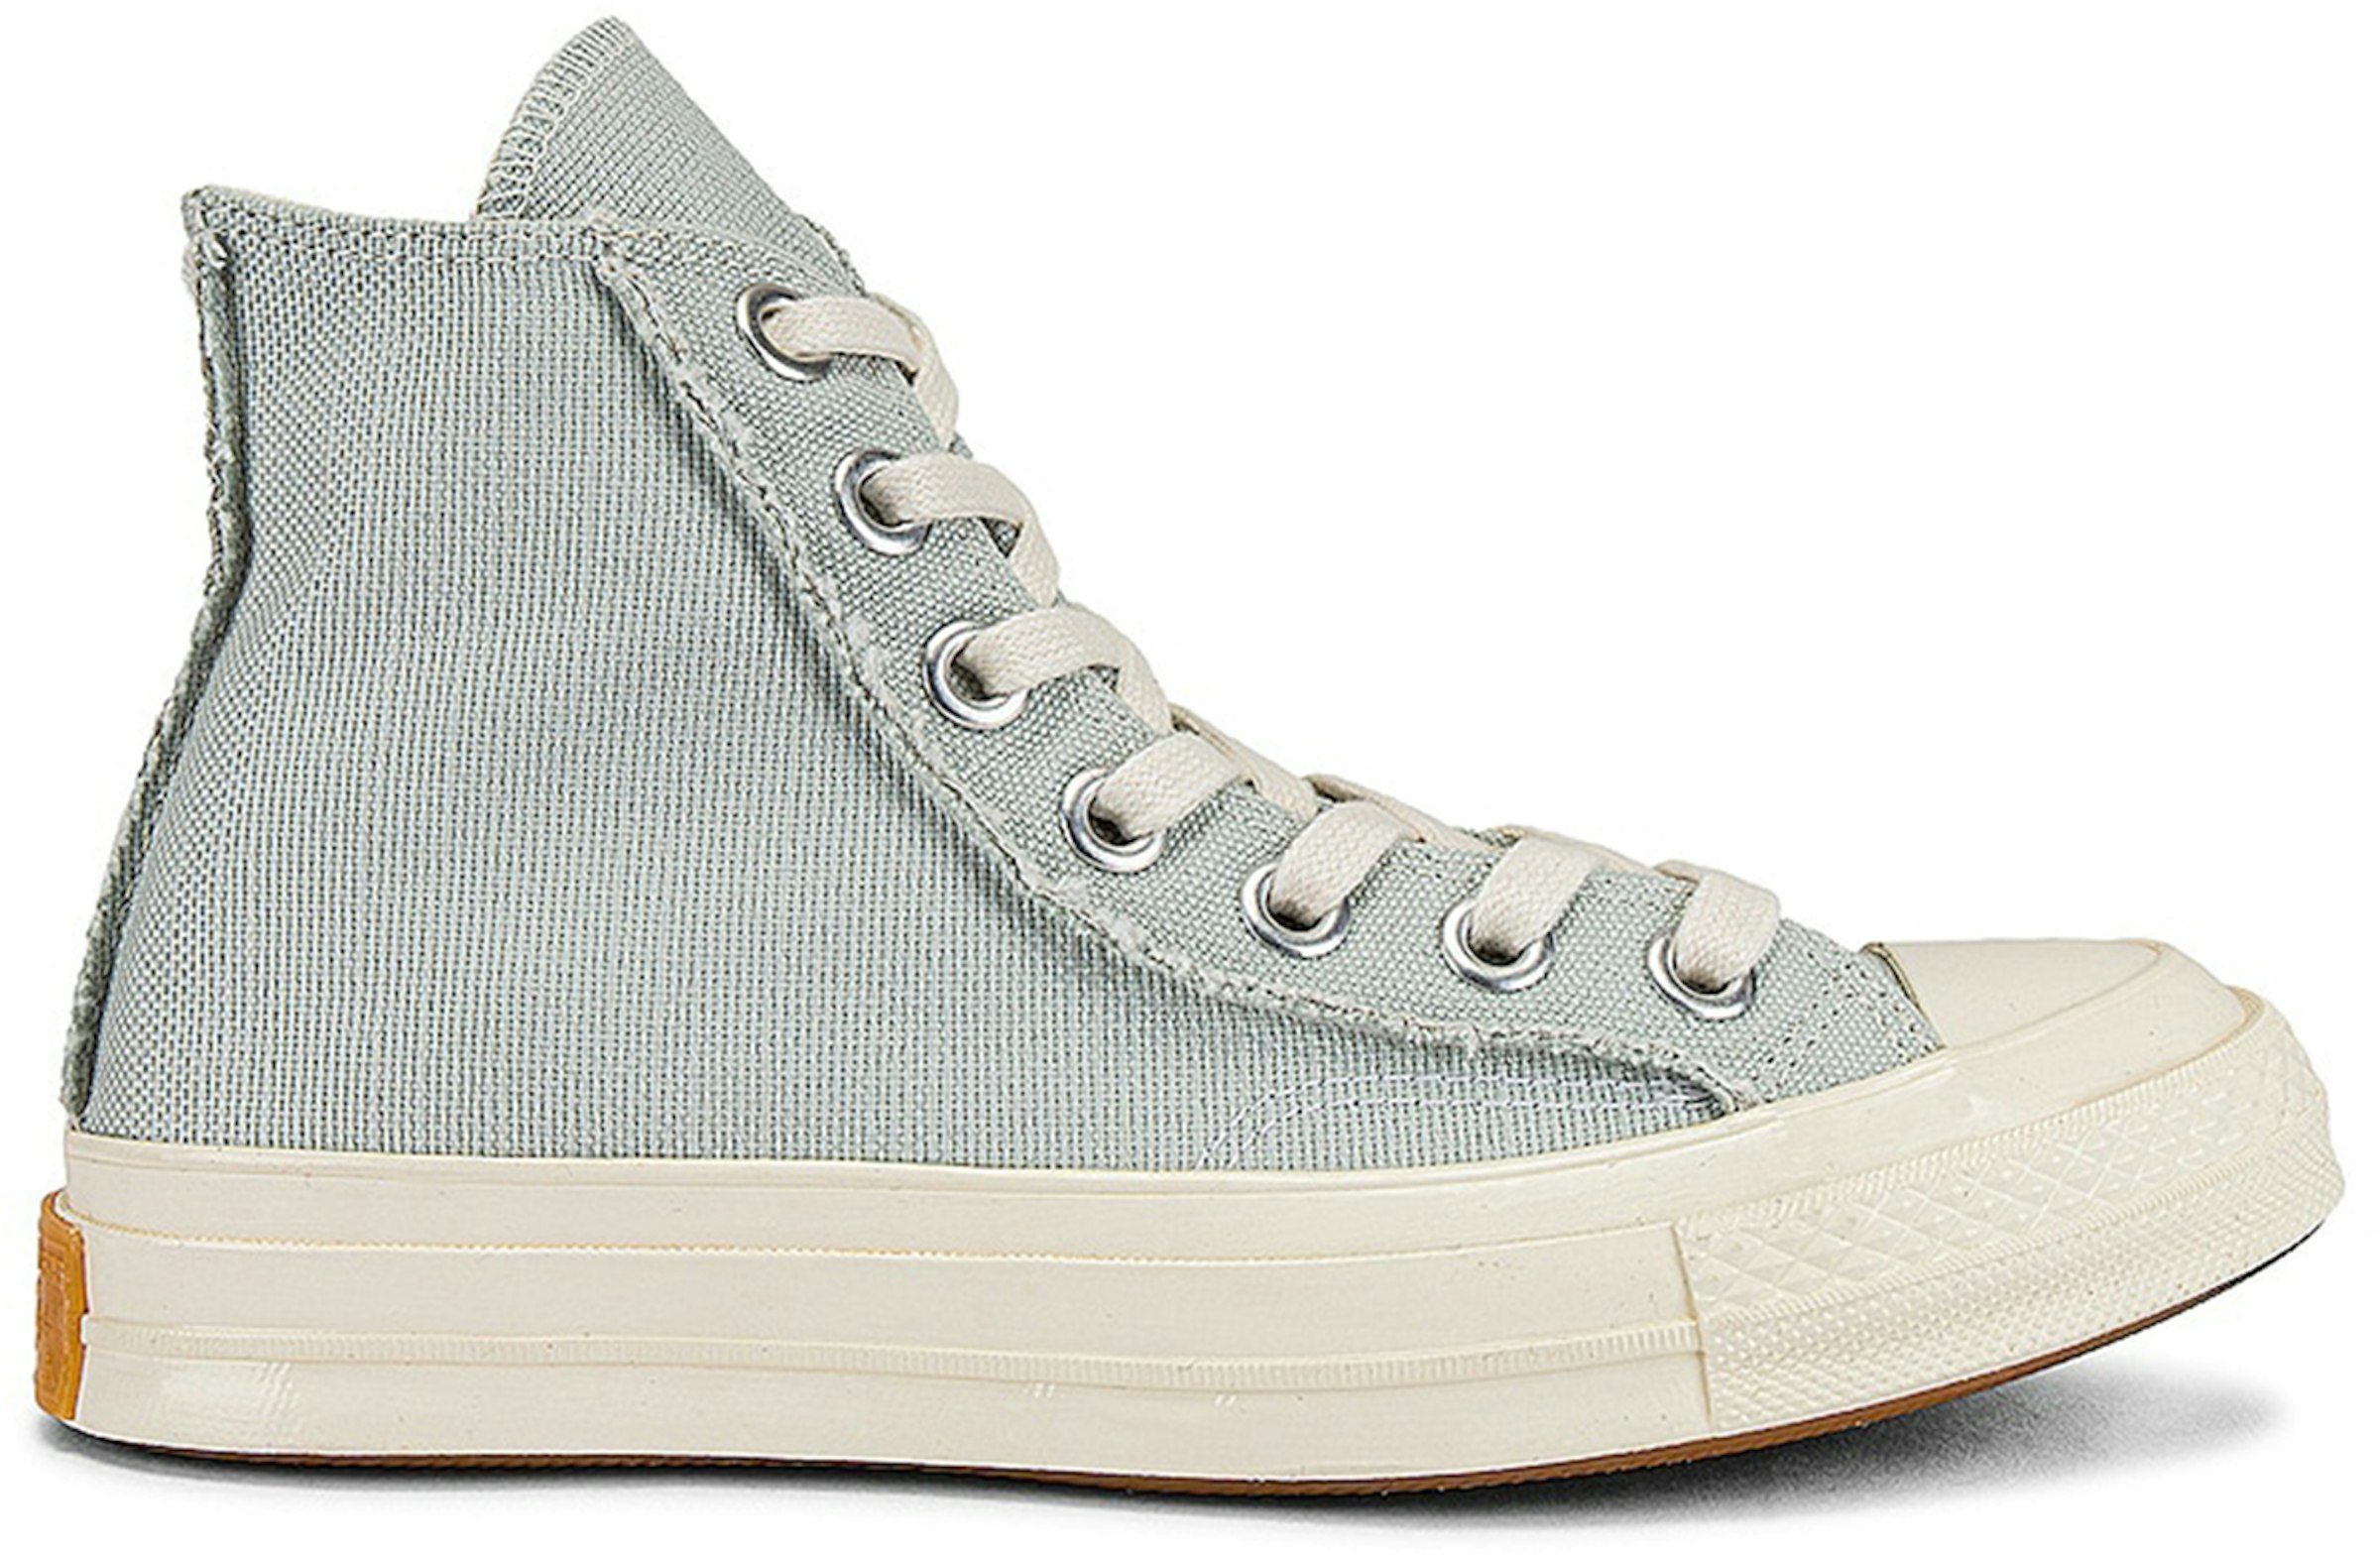 Converse Taylor All-Star Hi Crafted (Women's) - 572611C - US